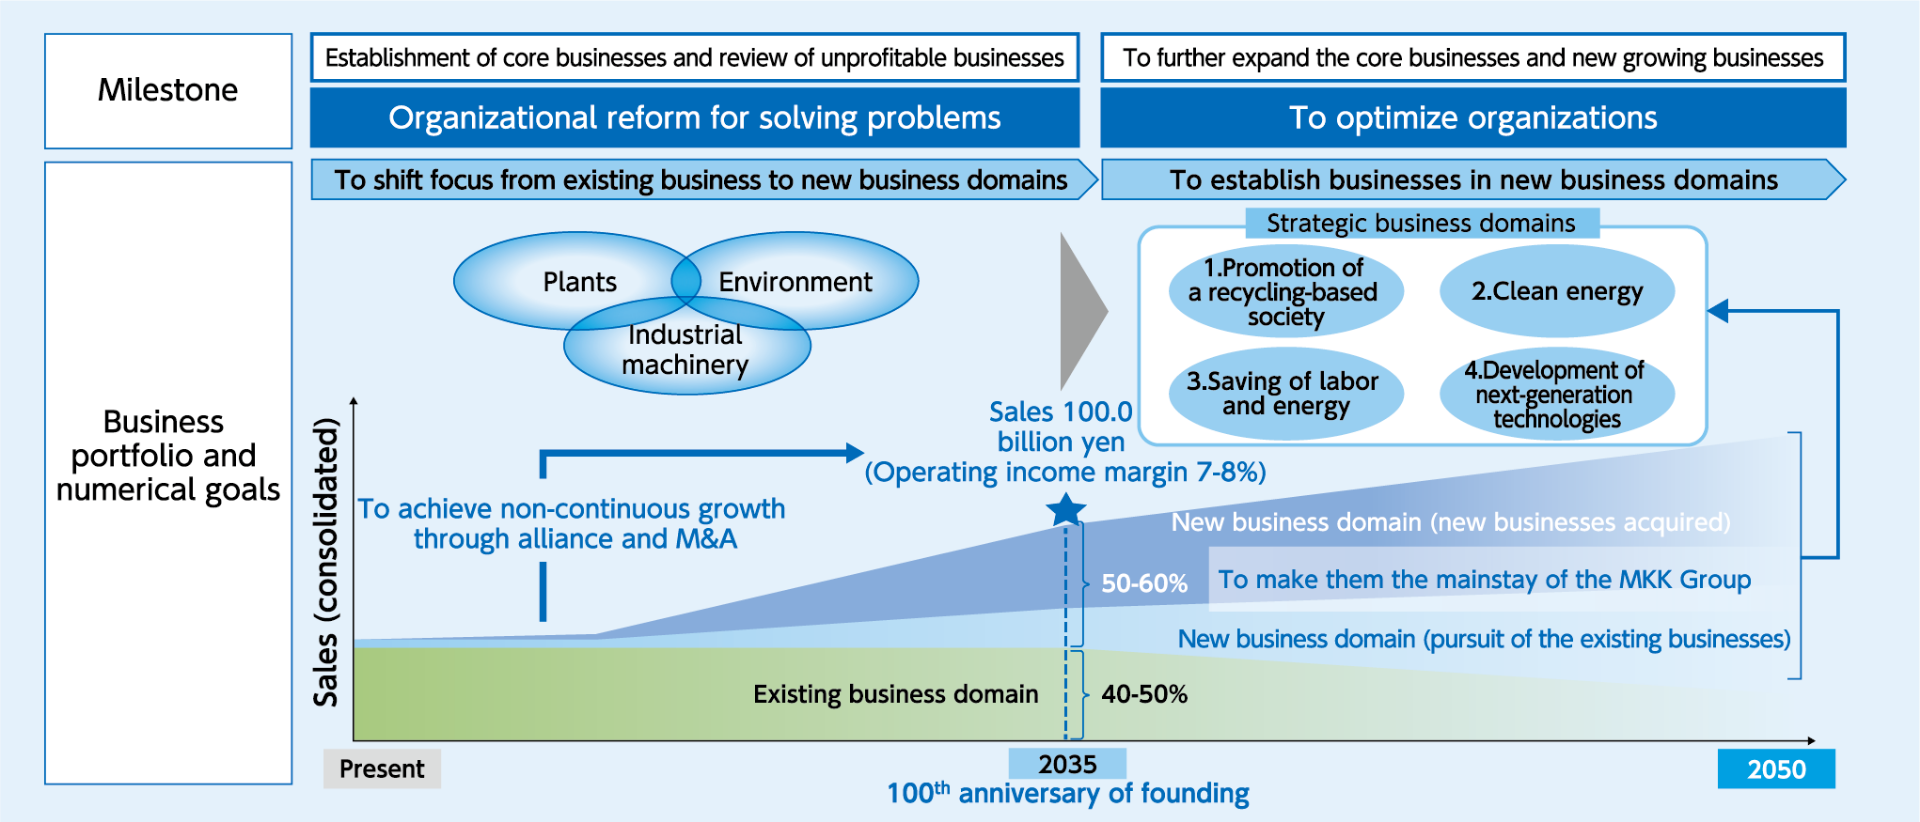 Reform of the business portfolio and an ideal revenue structure